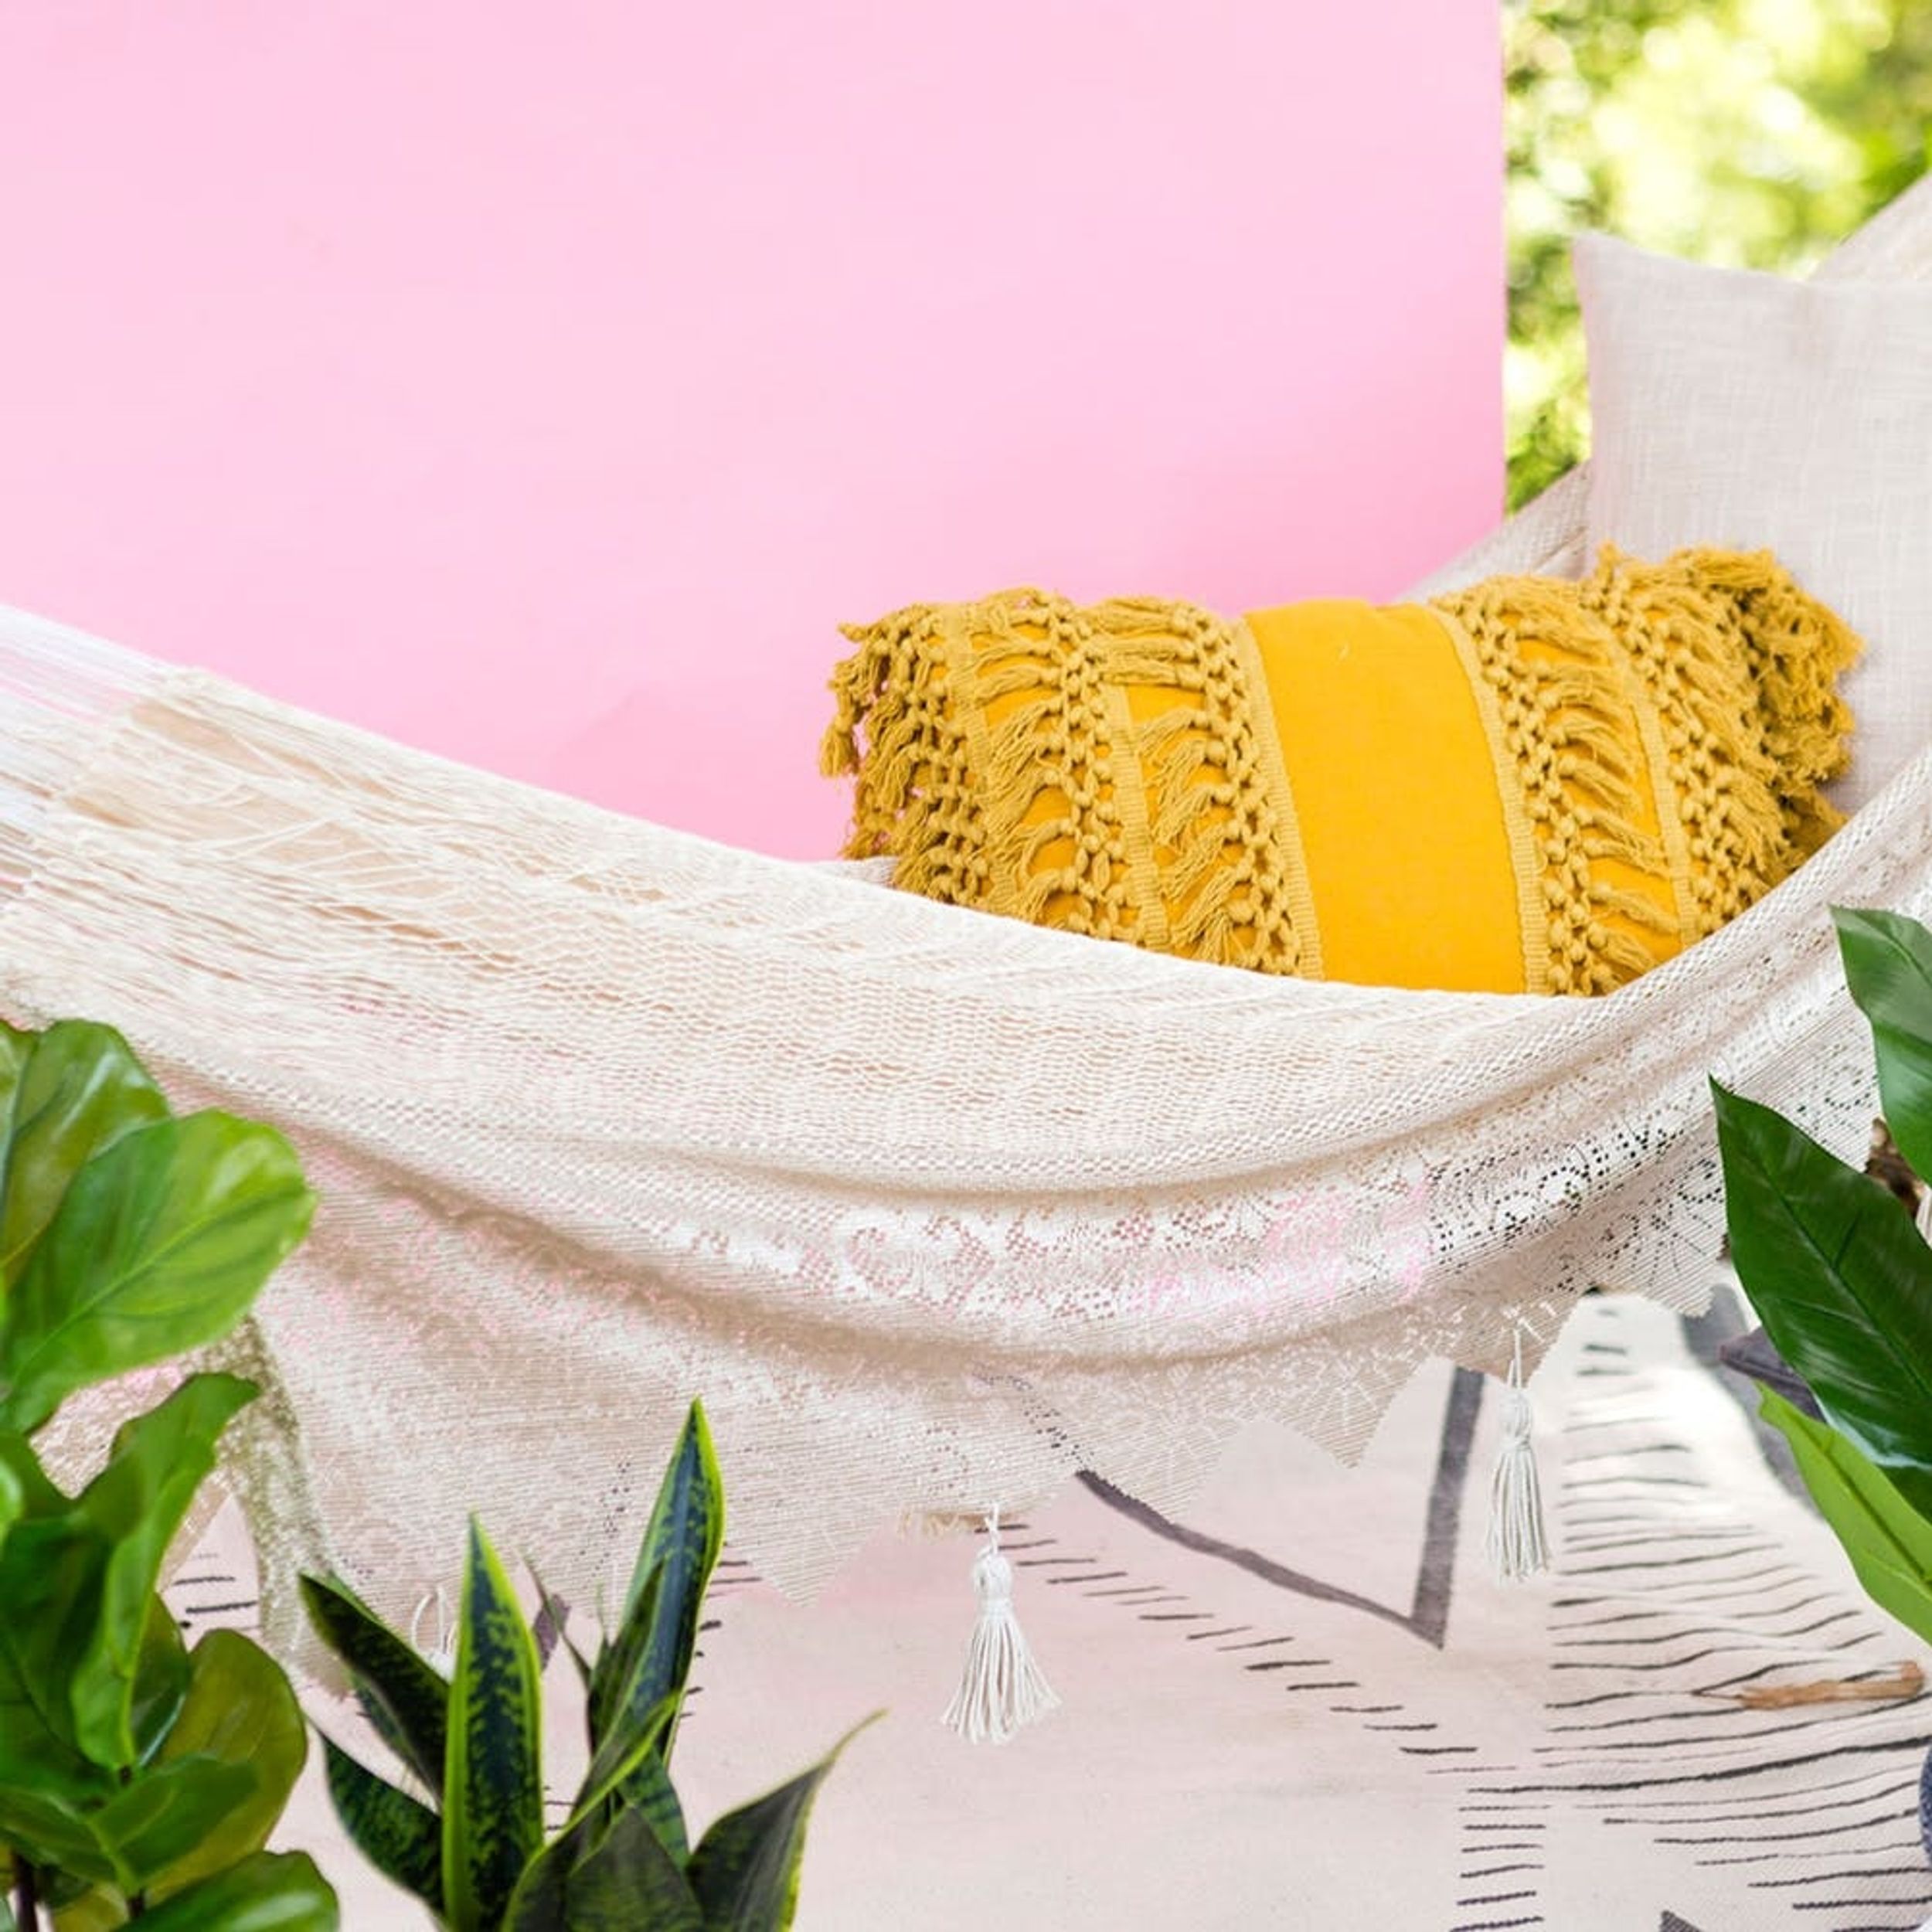 Use This Home Decor Item to Upgrade Your Patio’s Hammock